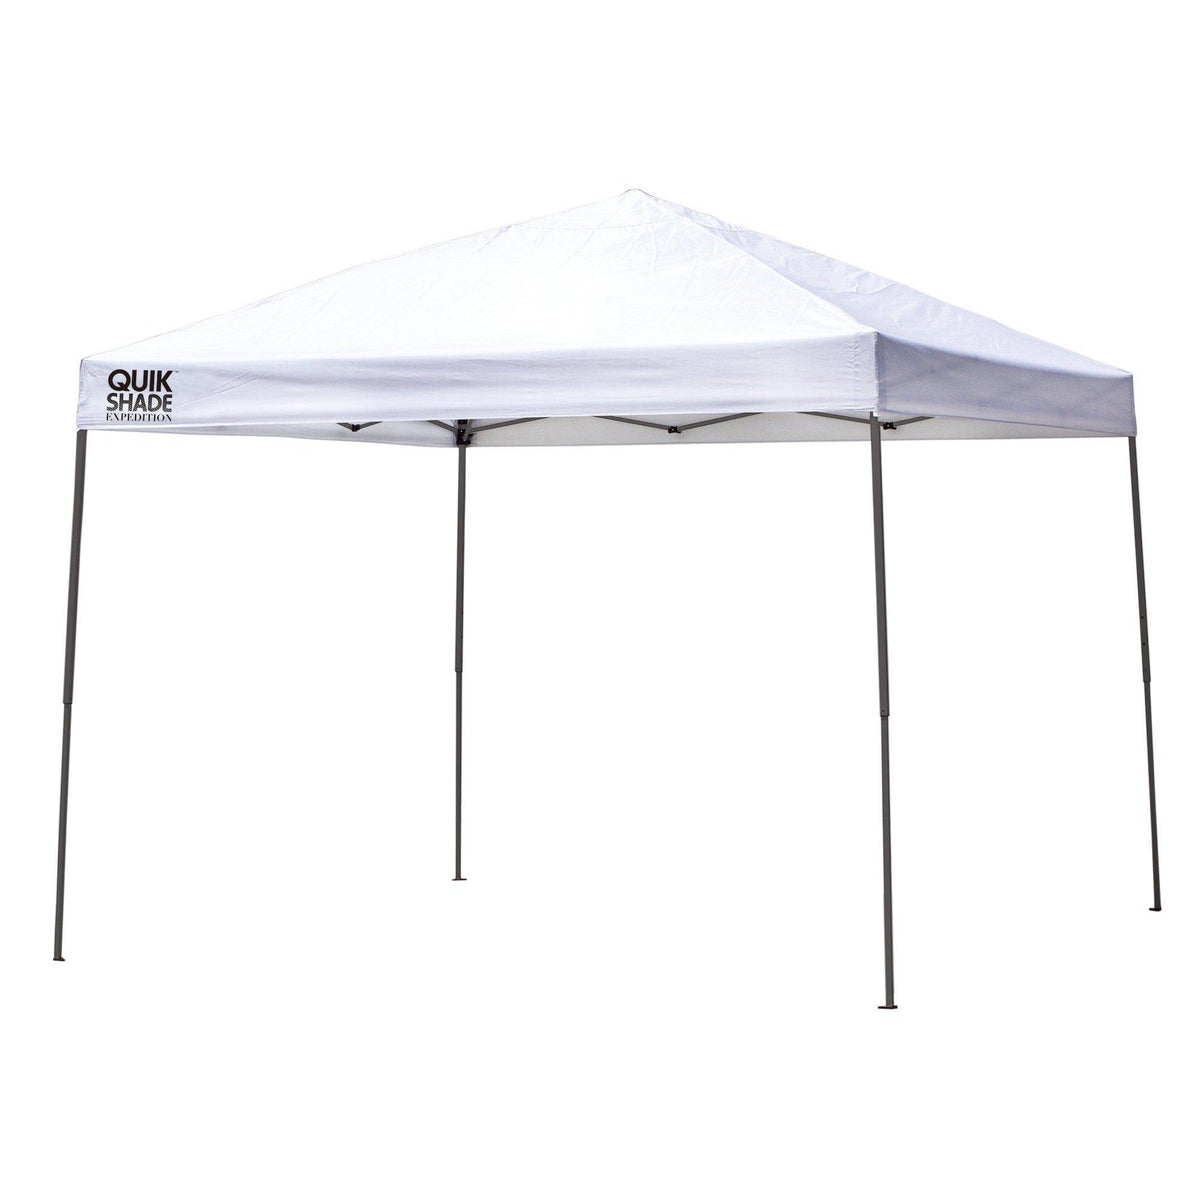 Quik Shade Expedition 10 x 10 ft. Straight Leg Canopy, White